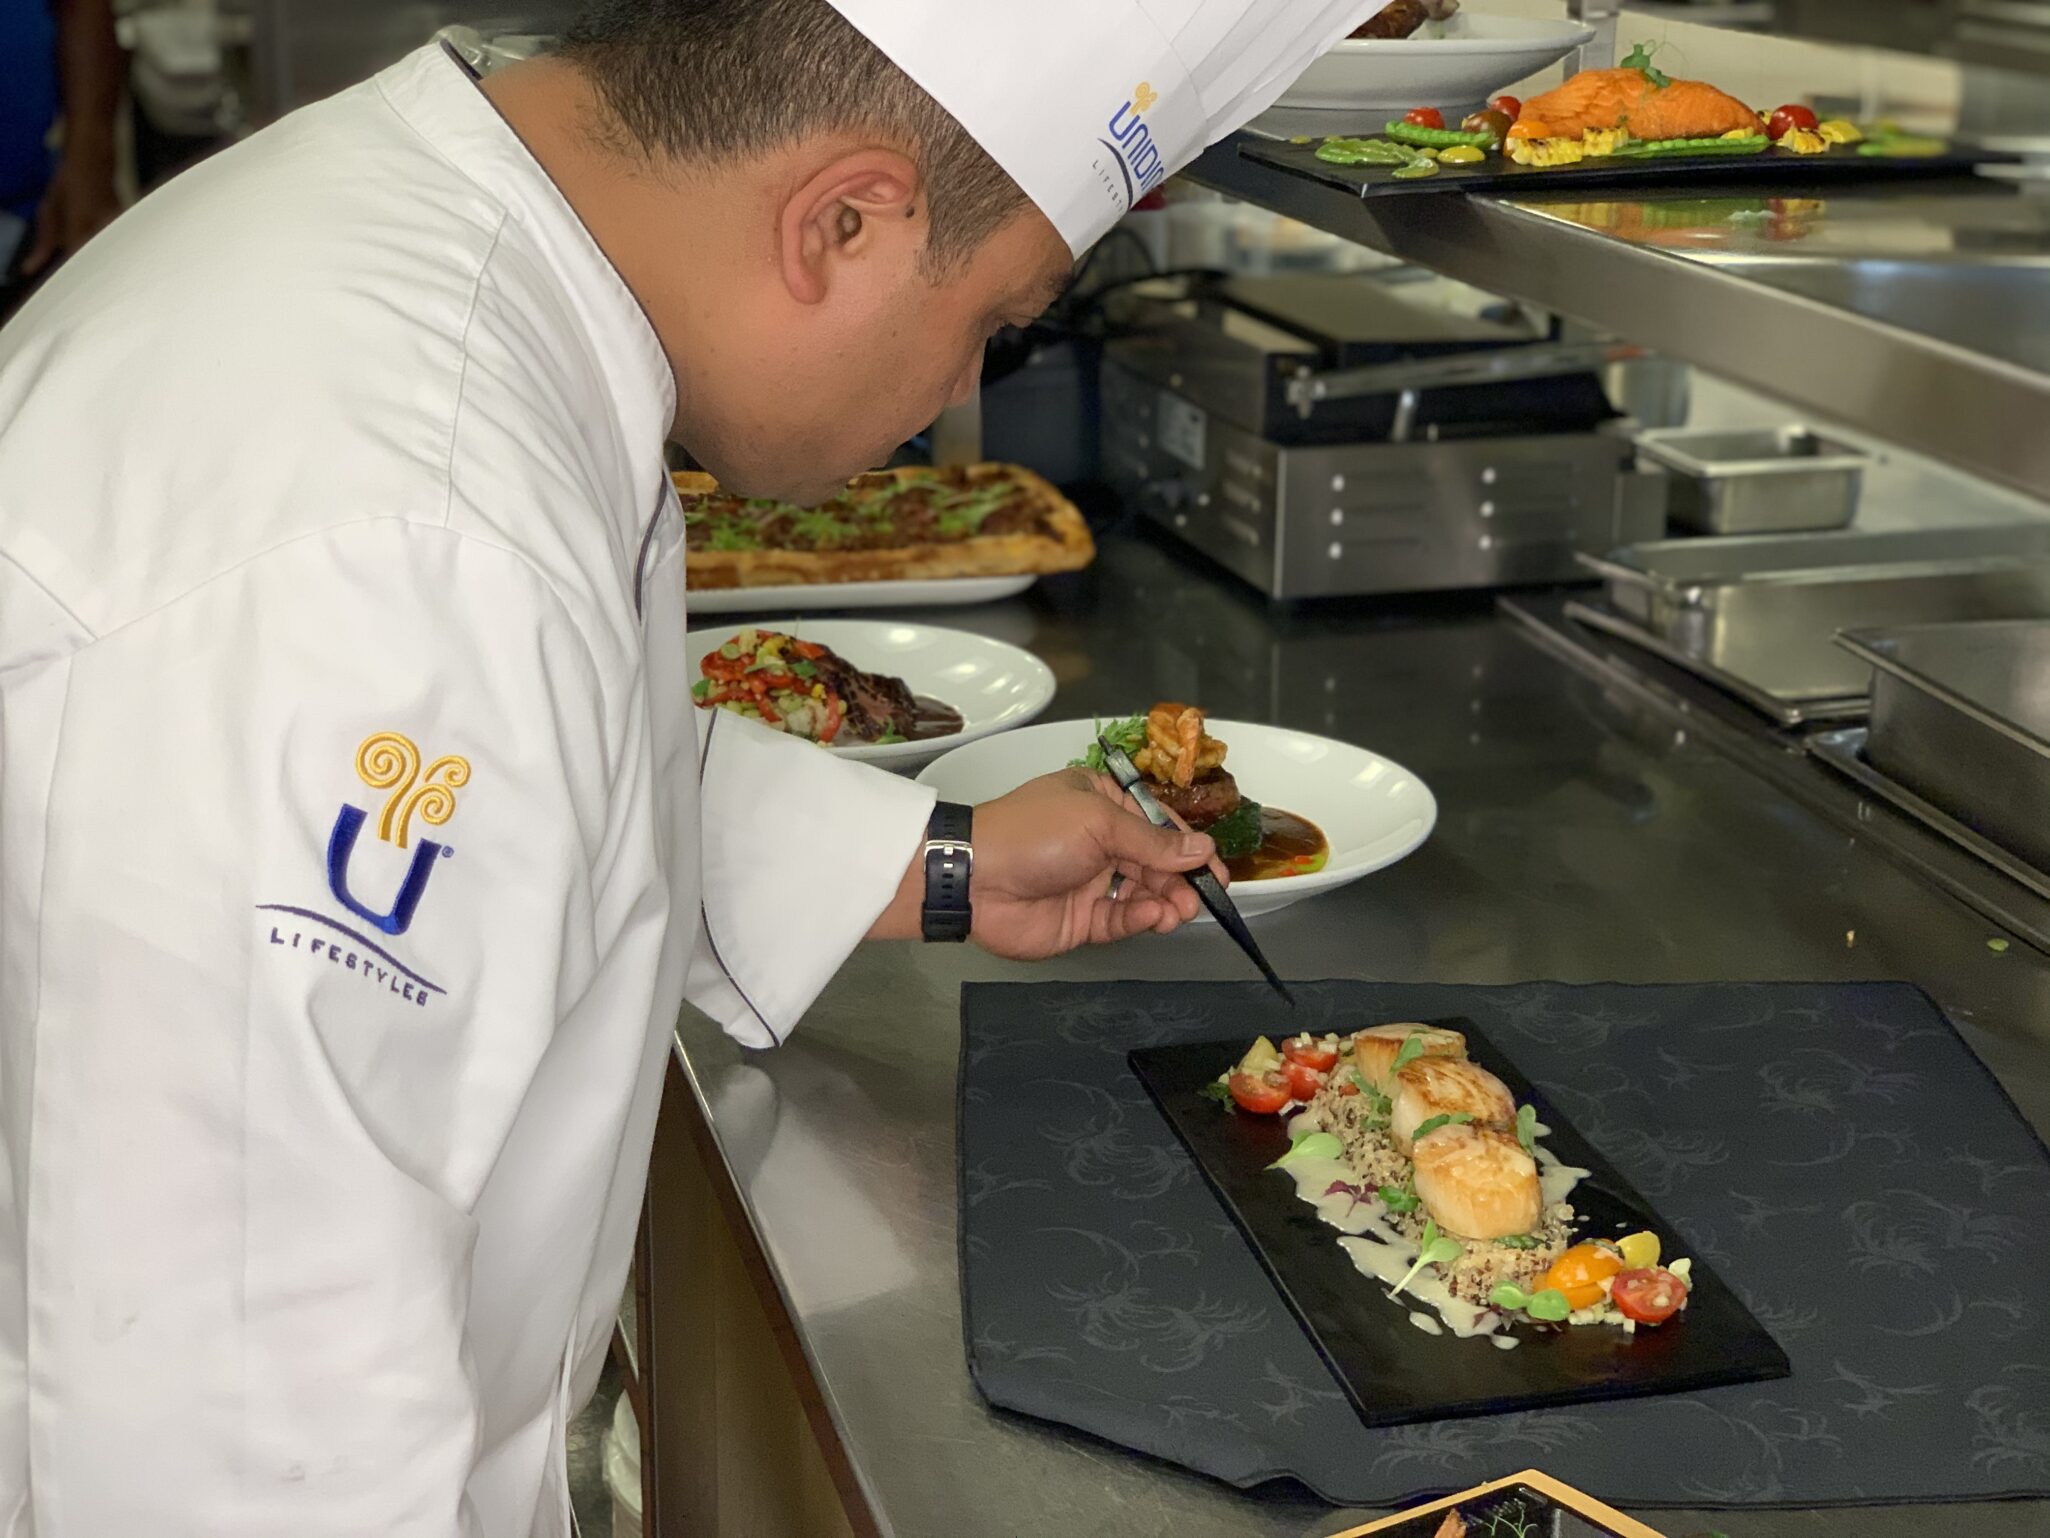 A chef carefully plates food on a black dish.